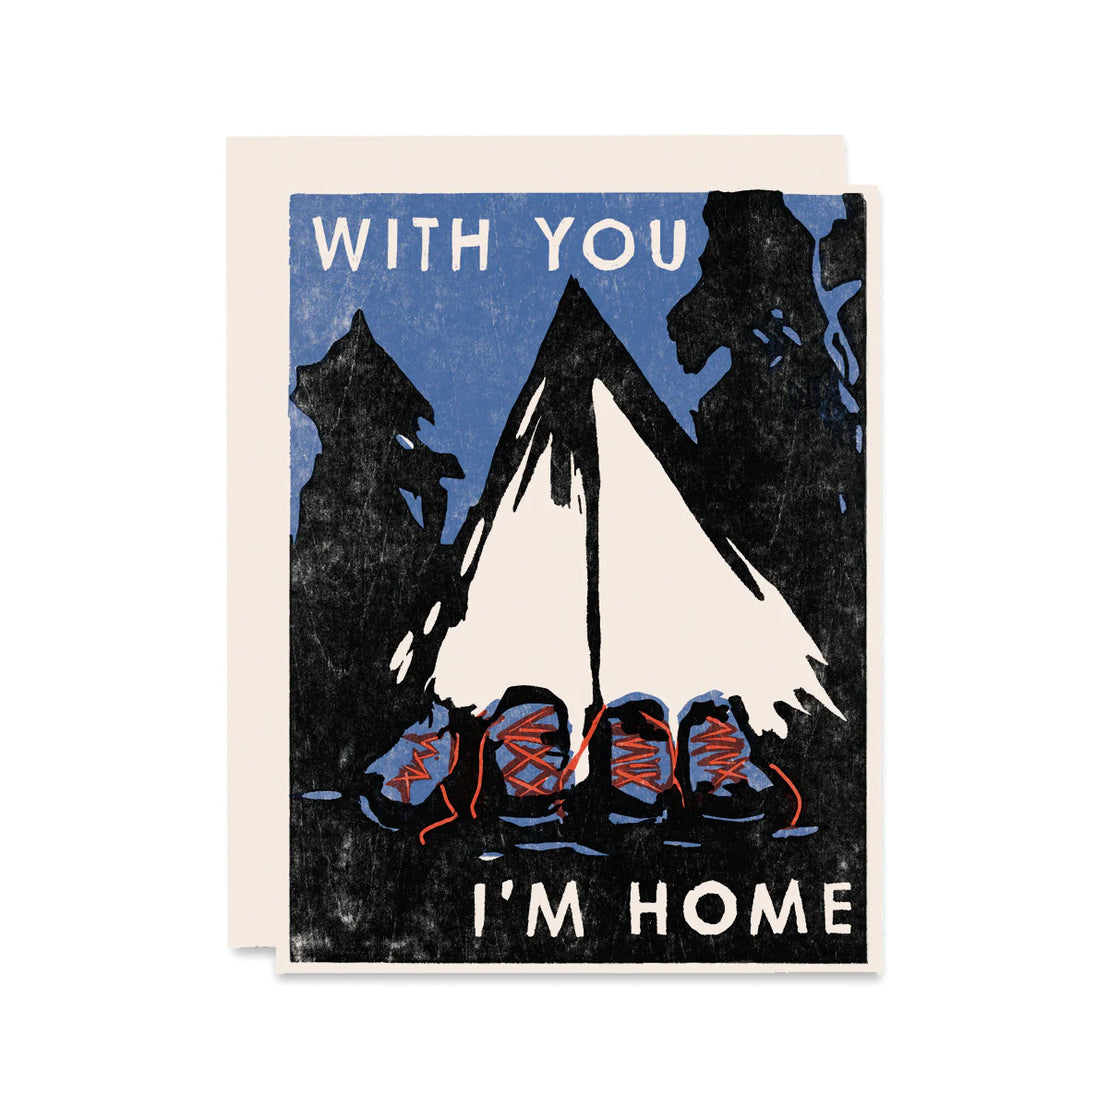 With You I'm Home, Heartell Press